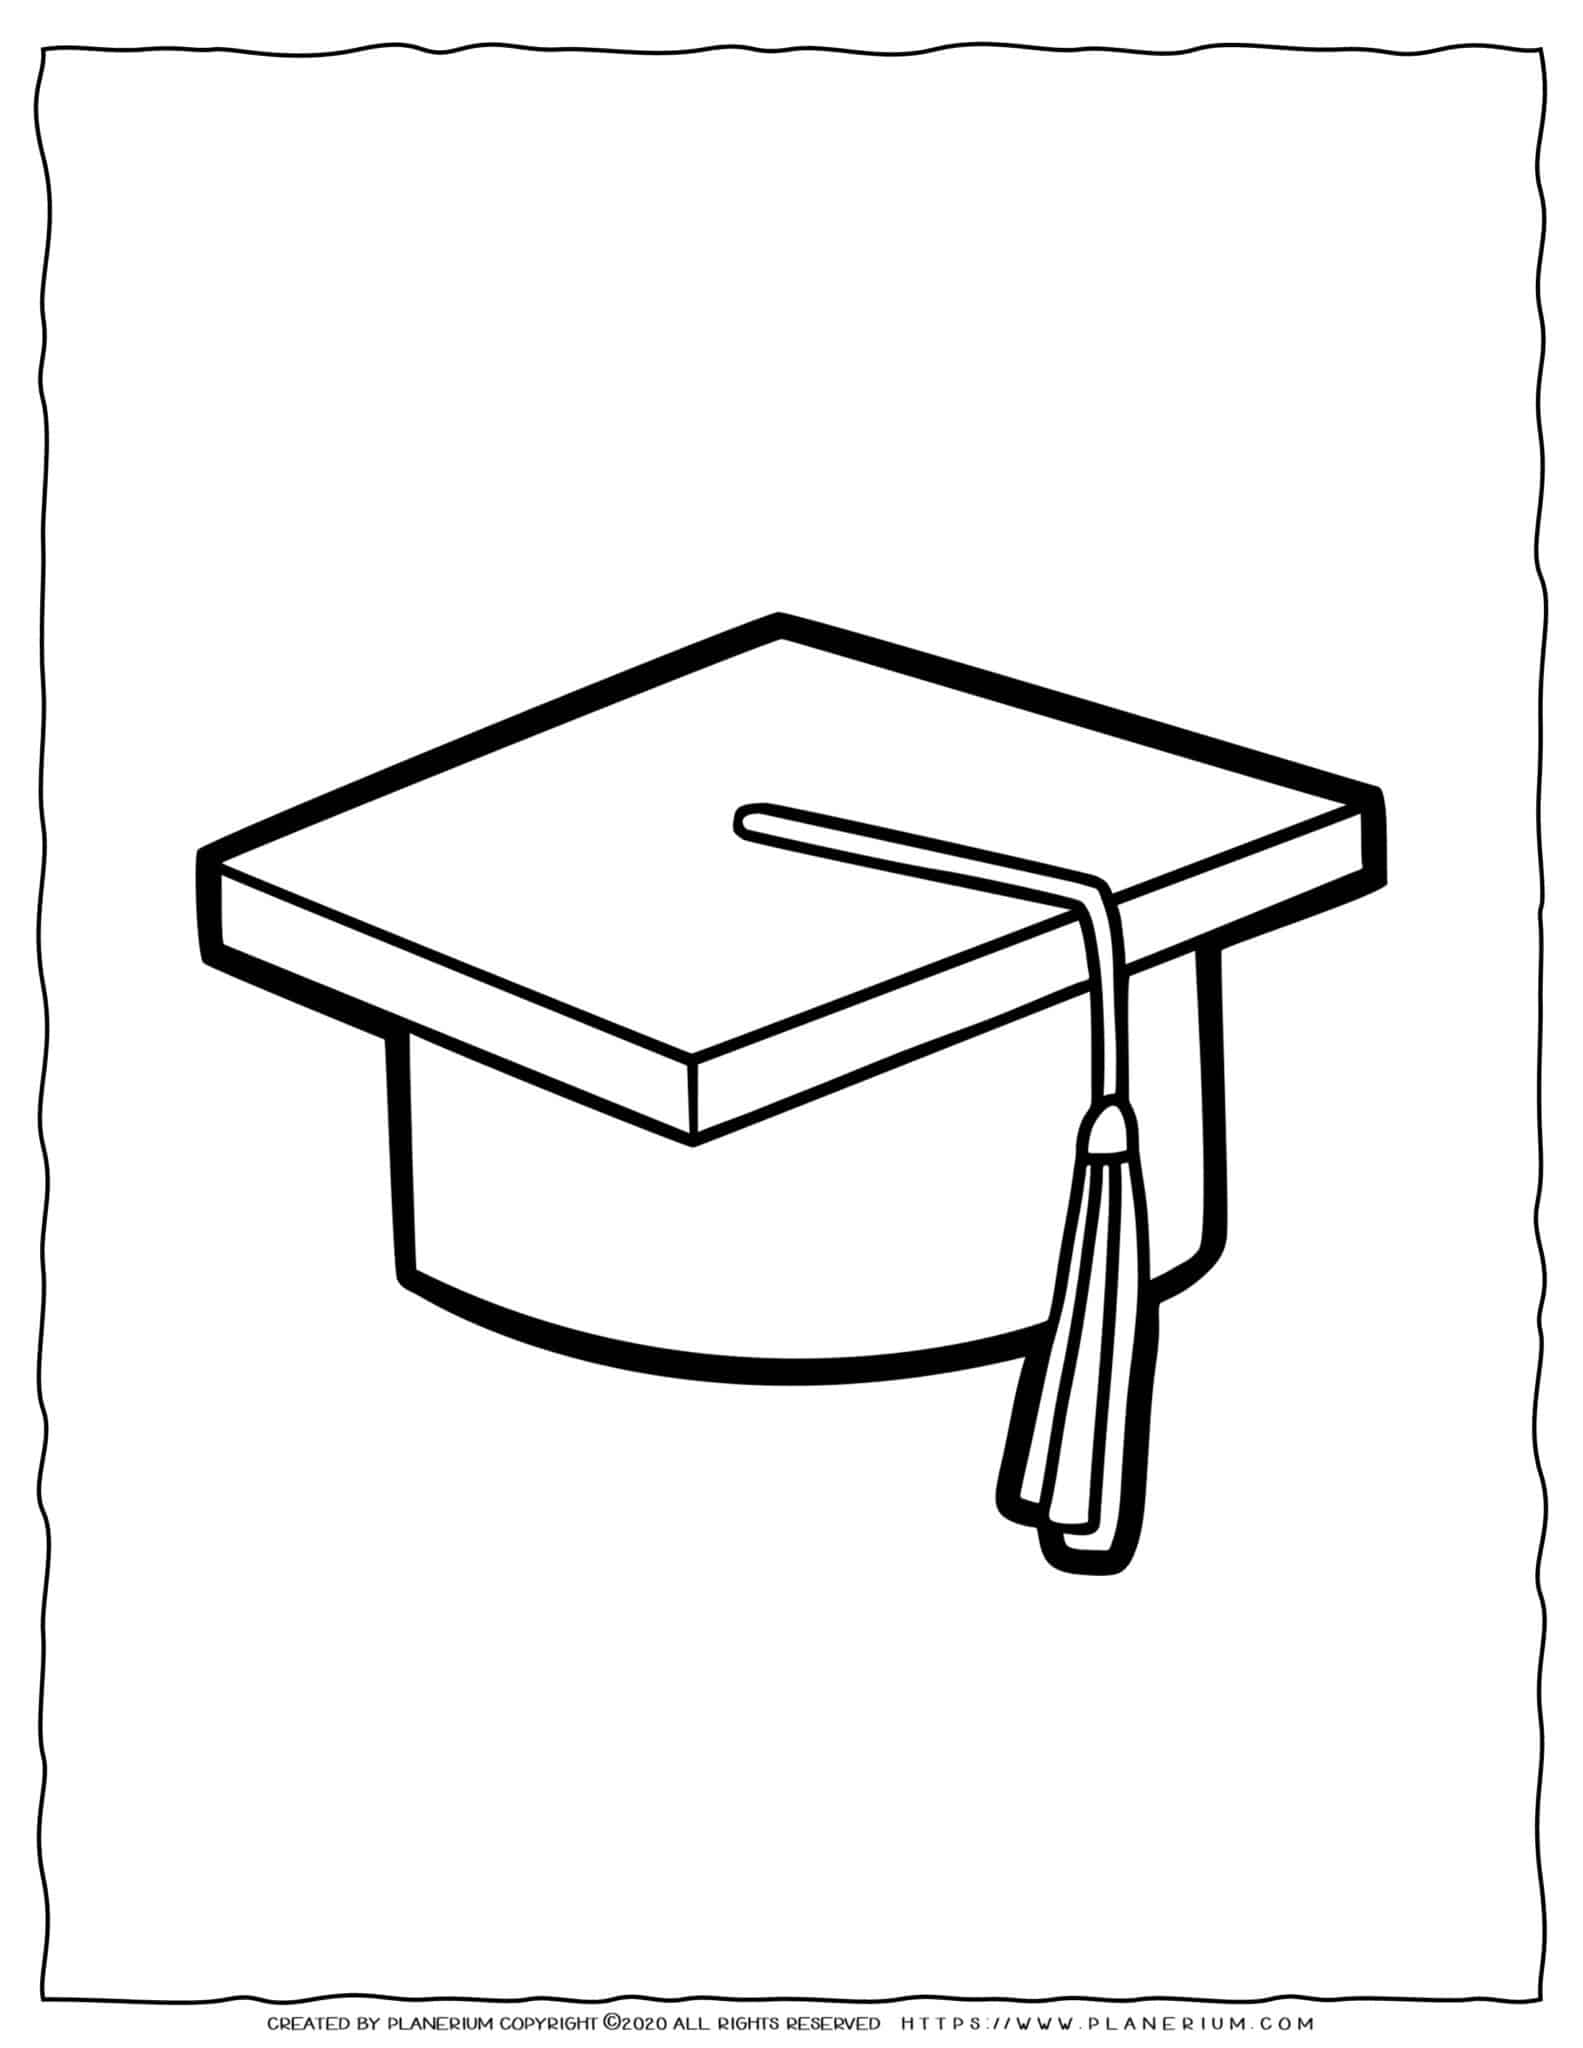 Fun graduation hat coloring page for kids